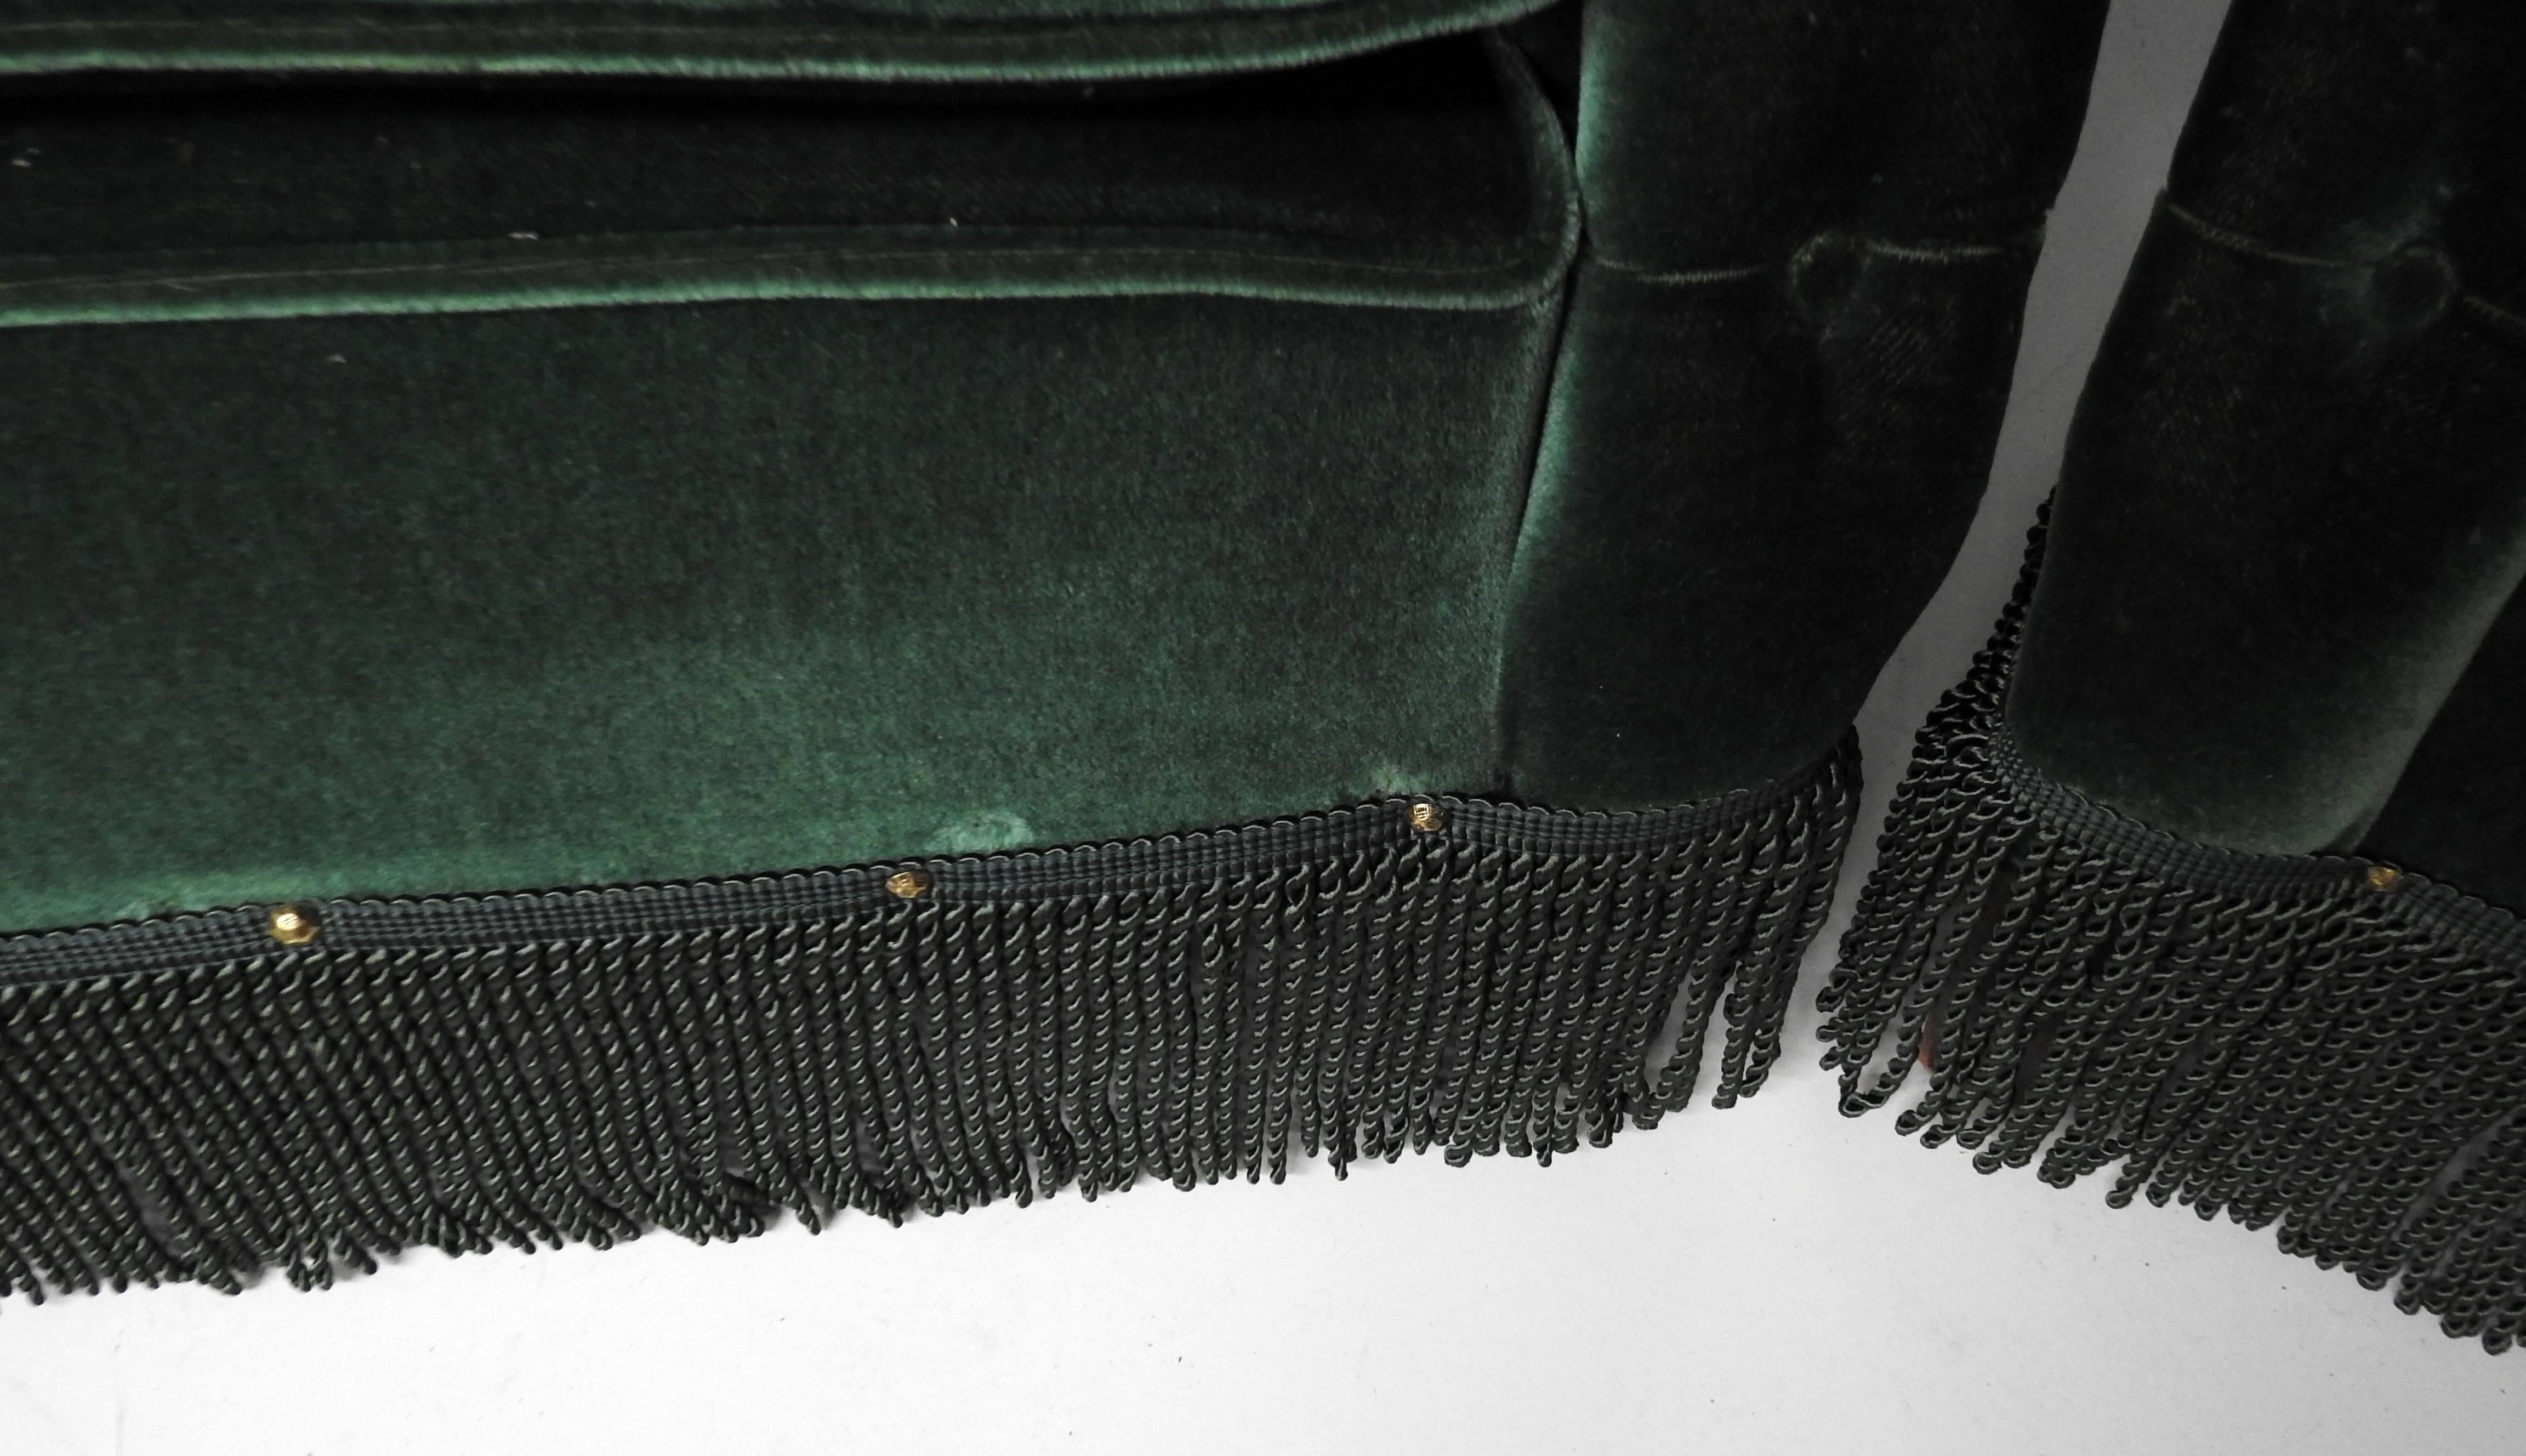 Pair of Hollywood Regency tufted club chairs with nailhead trim and fringe skirting.